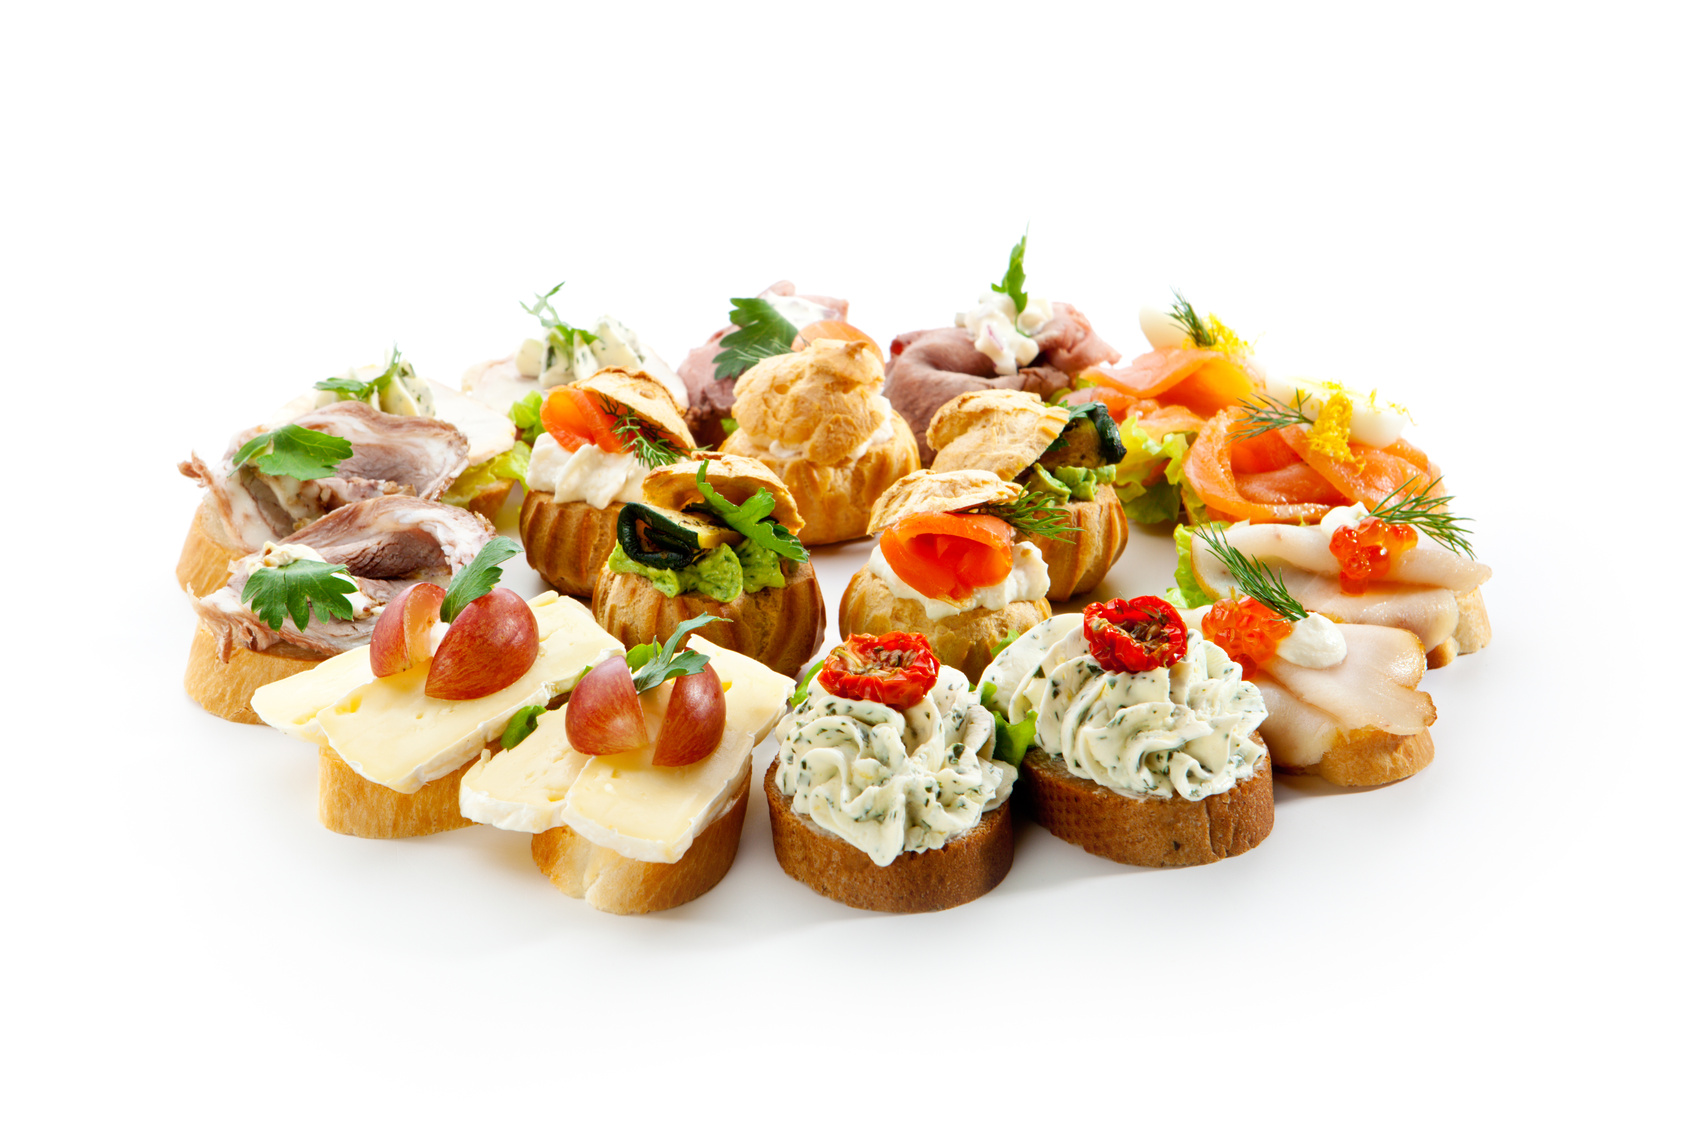 Cannapé: ESSENCE CATERING - Catering und Partyservice in Minden, Porta ...